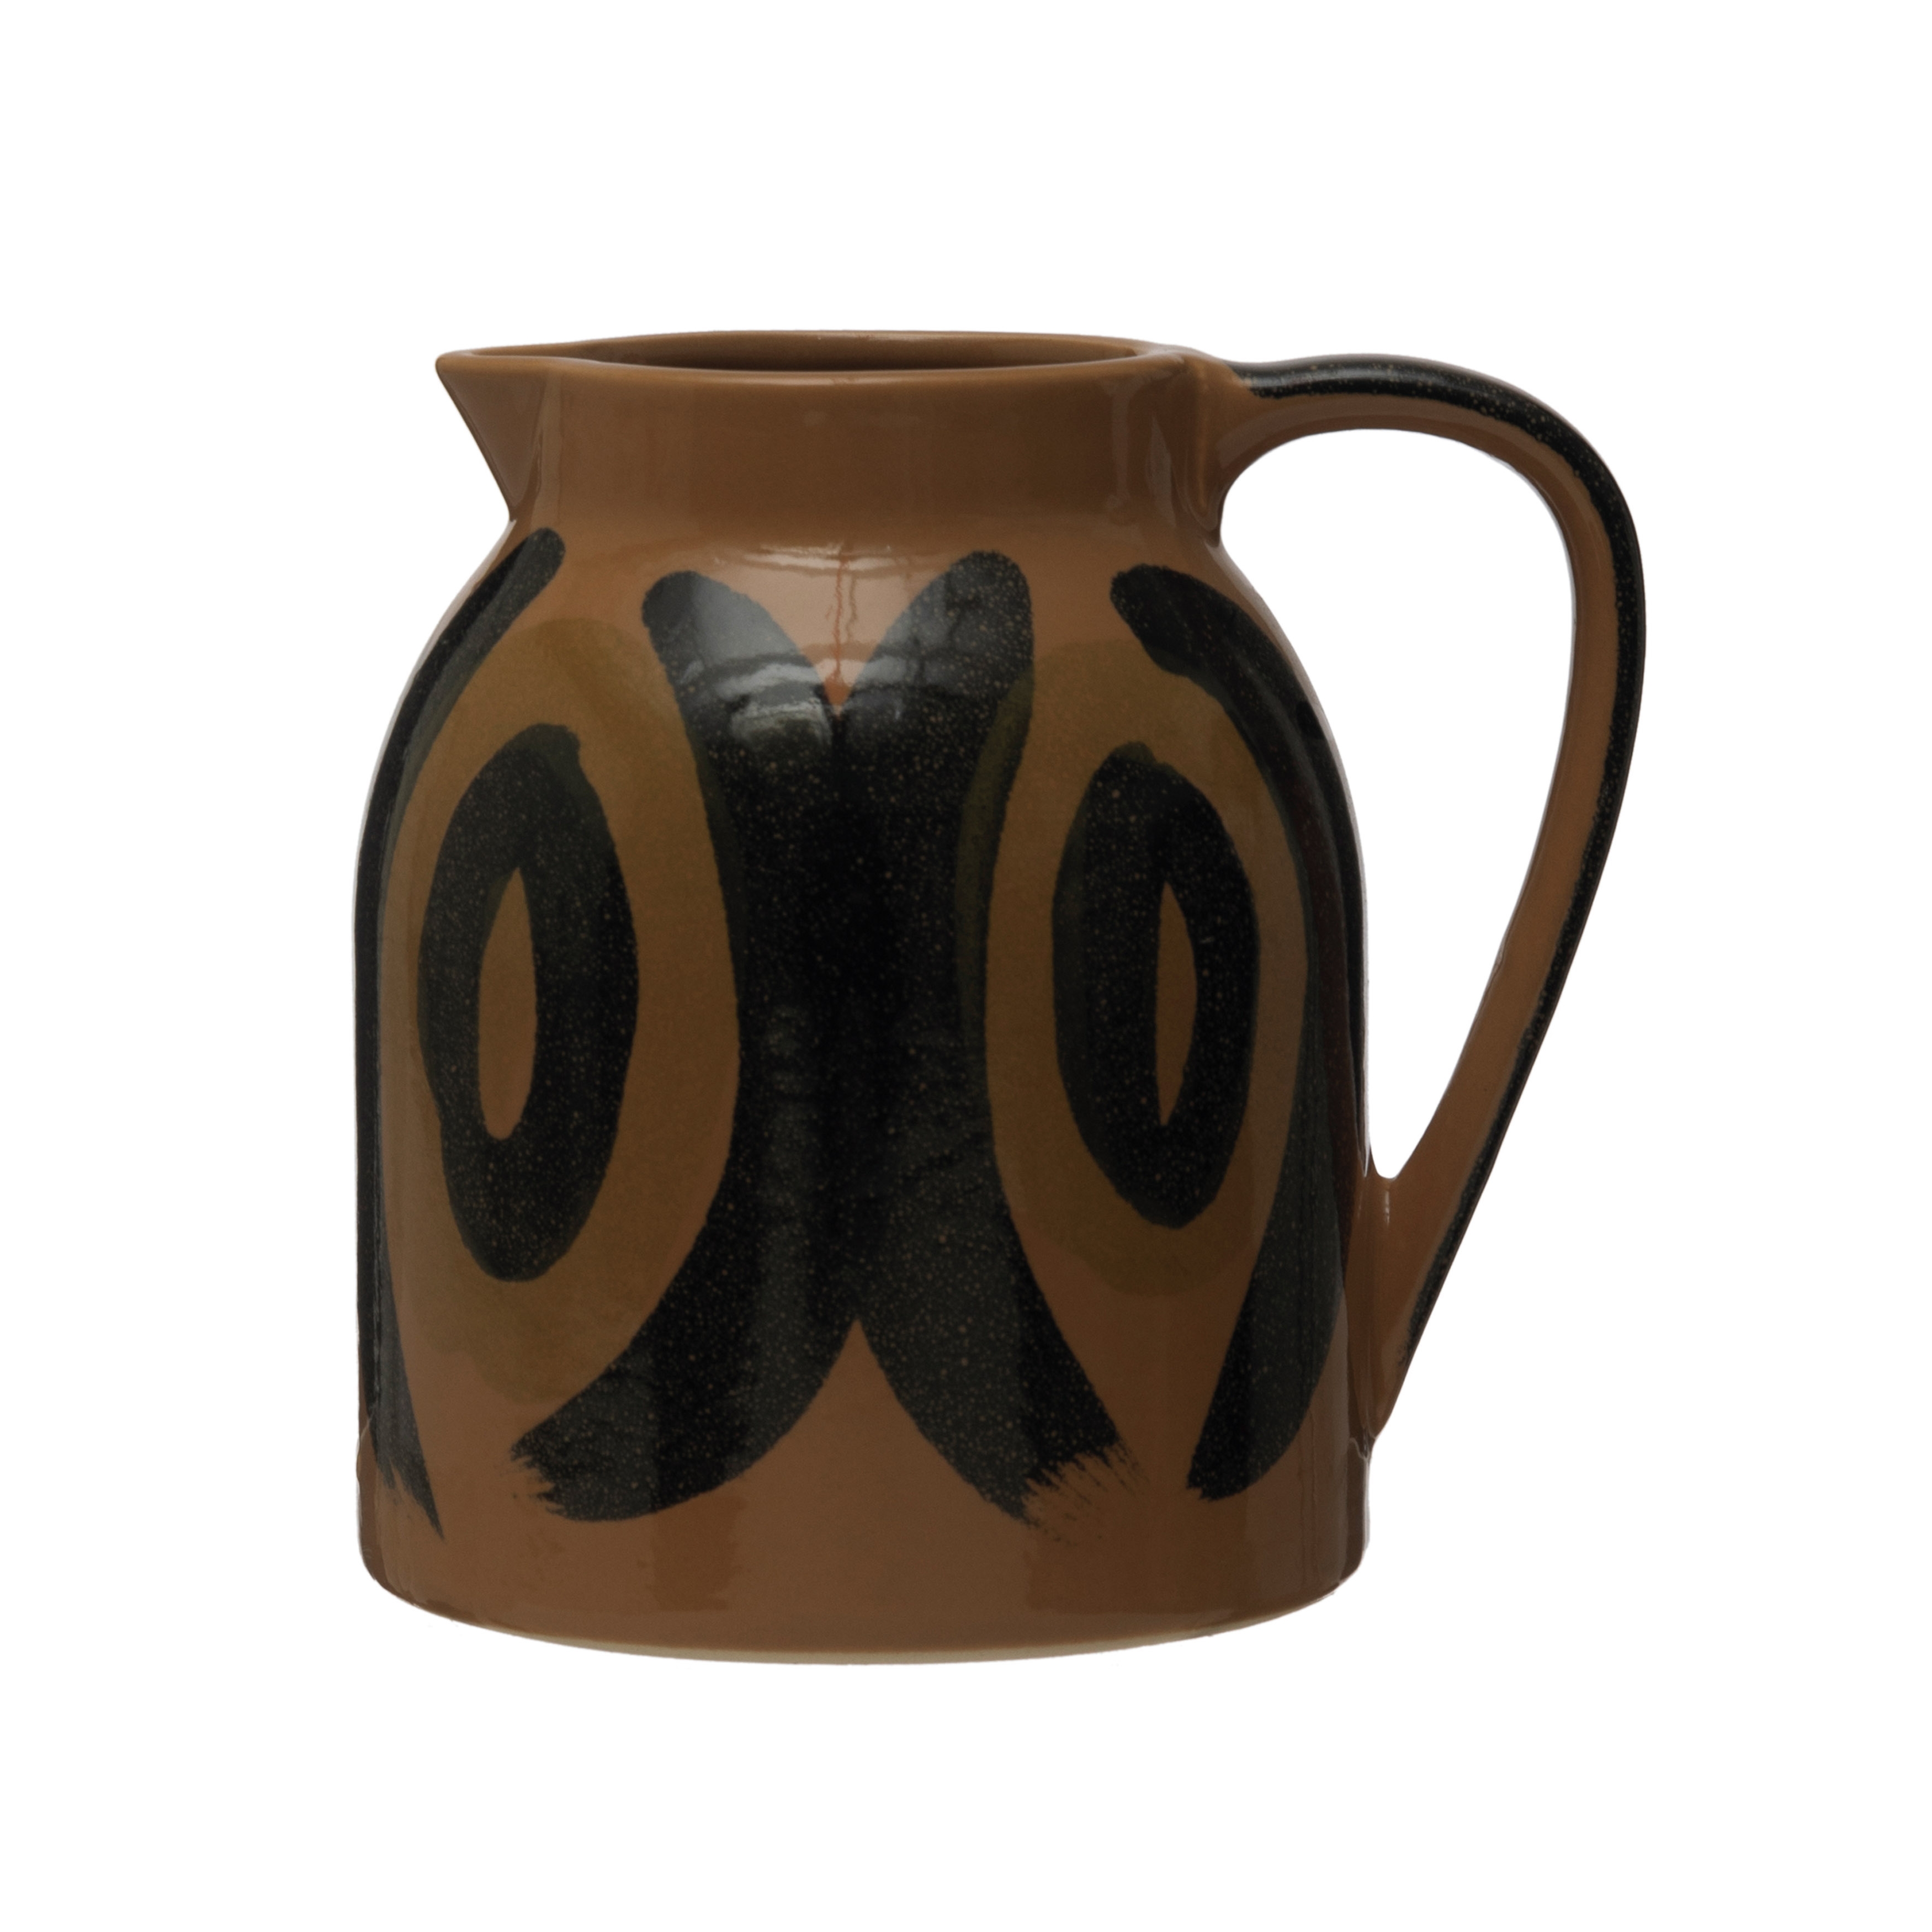  Decorative Hand Painted Stoneware Pitcher, Brown and Black - Image 0